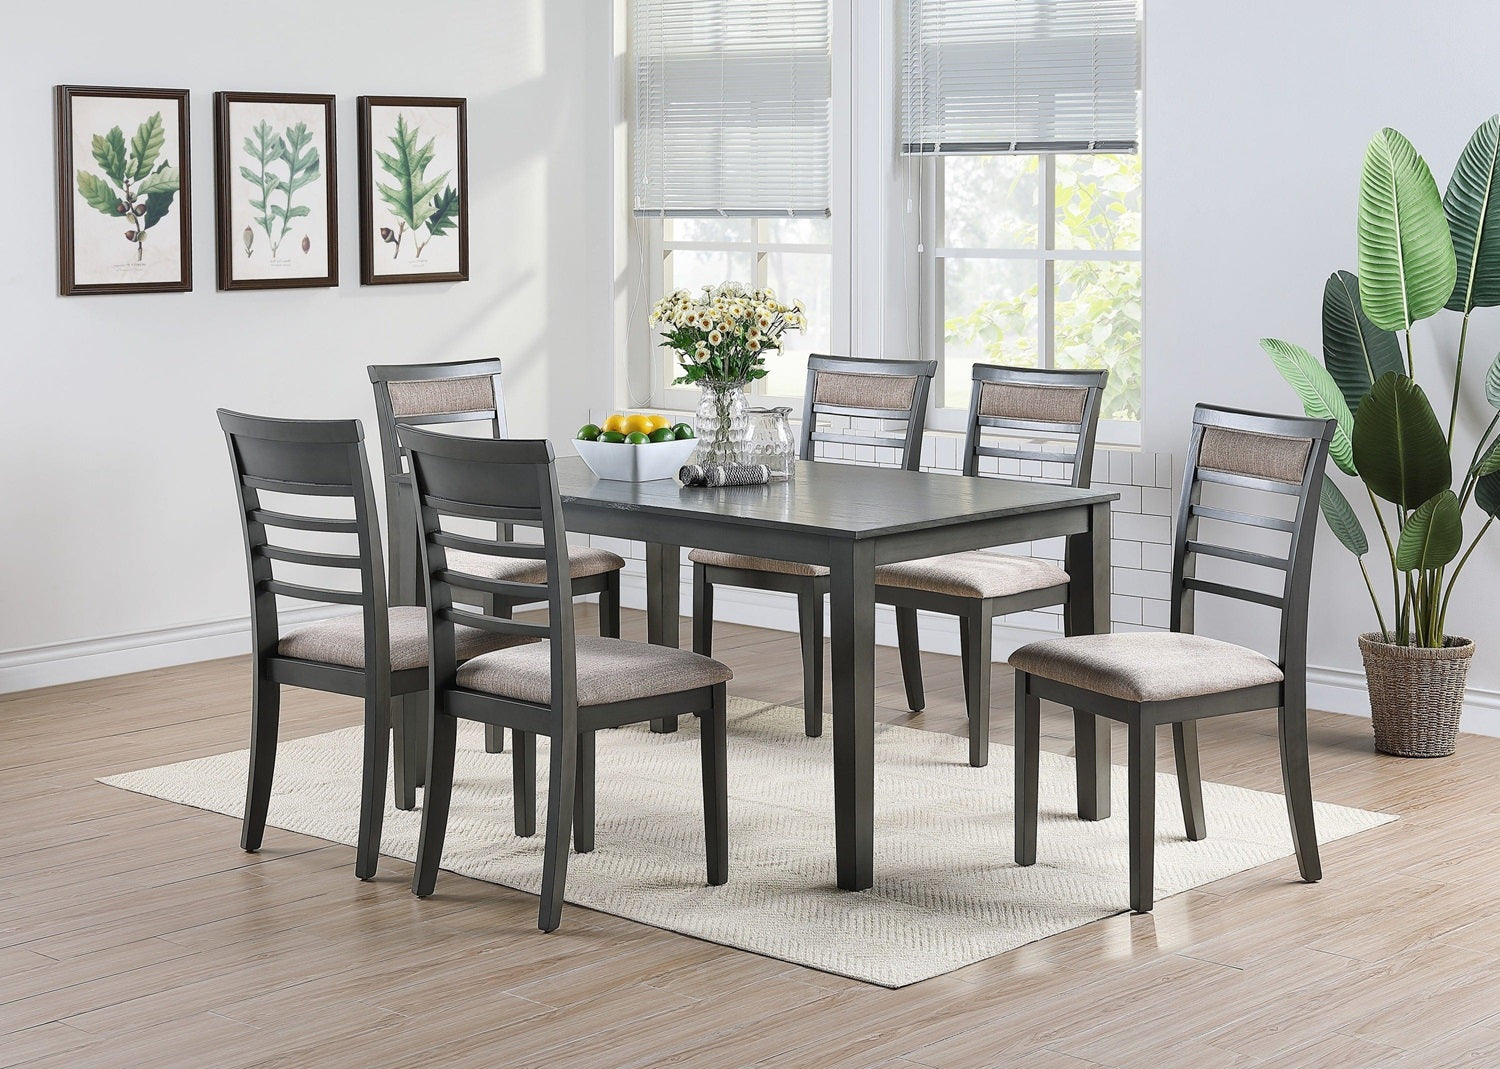 1st Choice Furniture Direct Dining Set 1st Choice Modern Unique Dining Table in Antique Grey Finish (7-Piece)